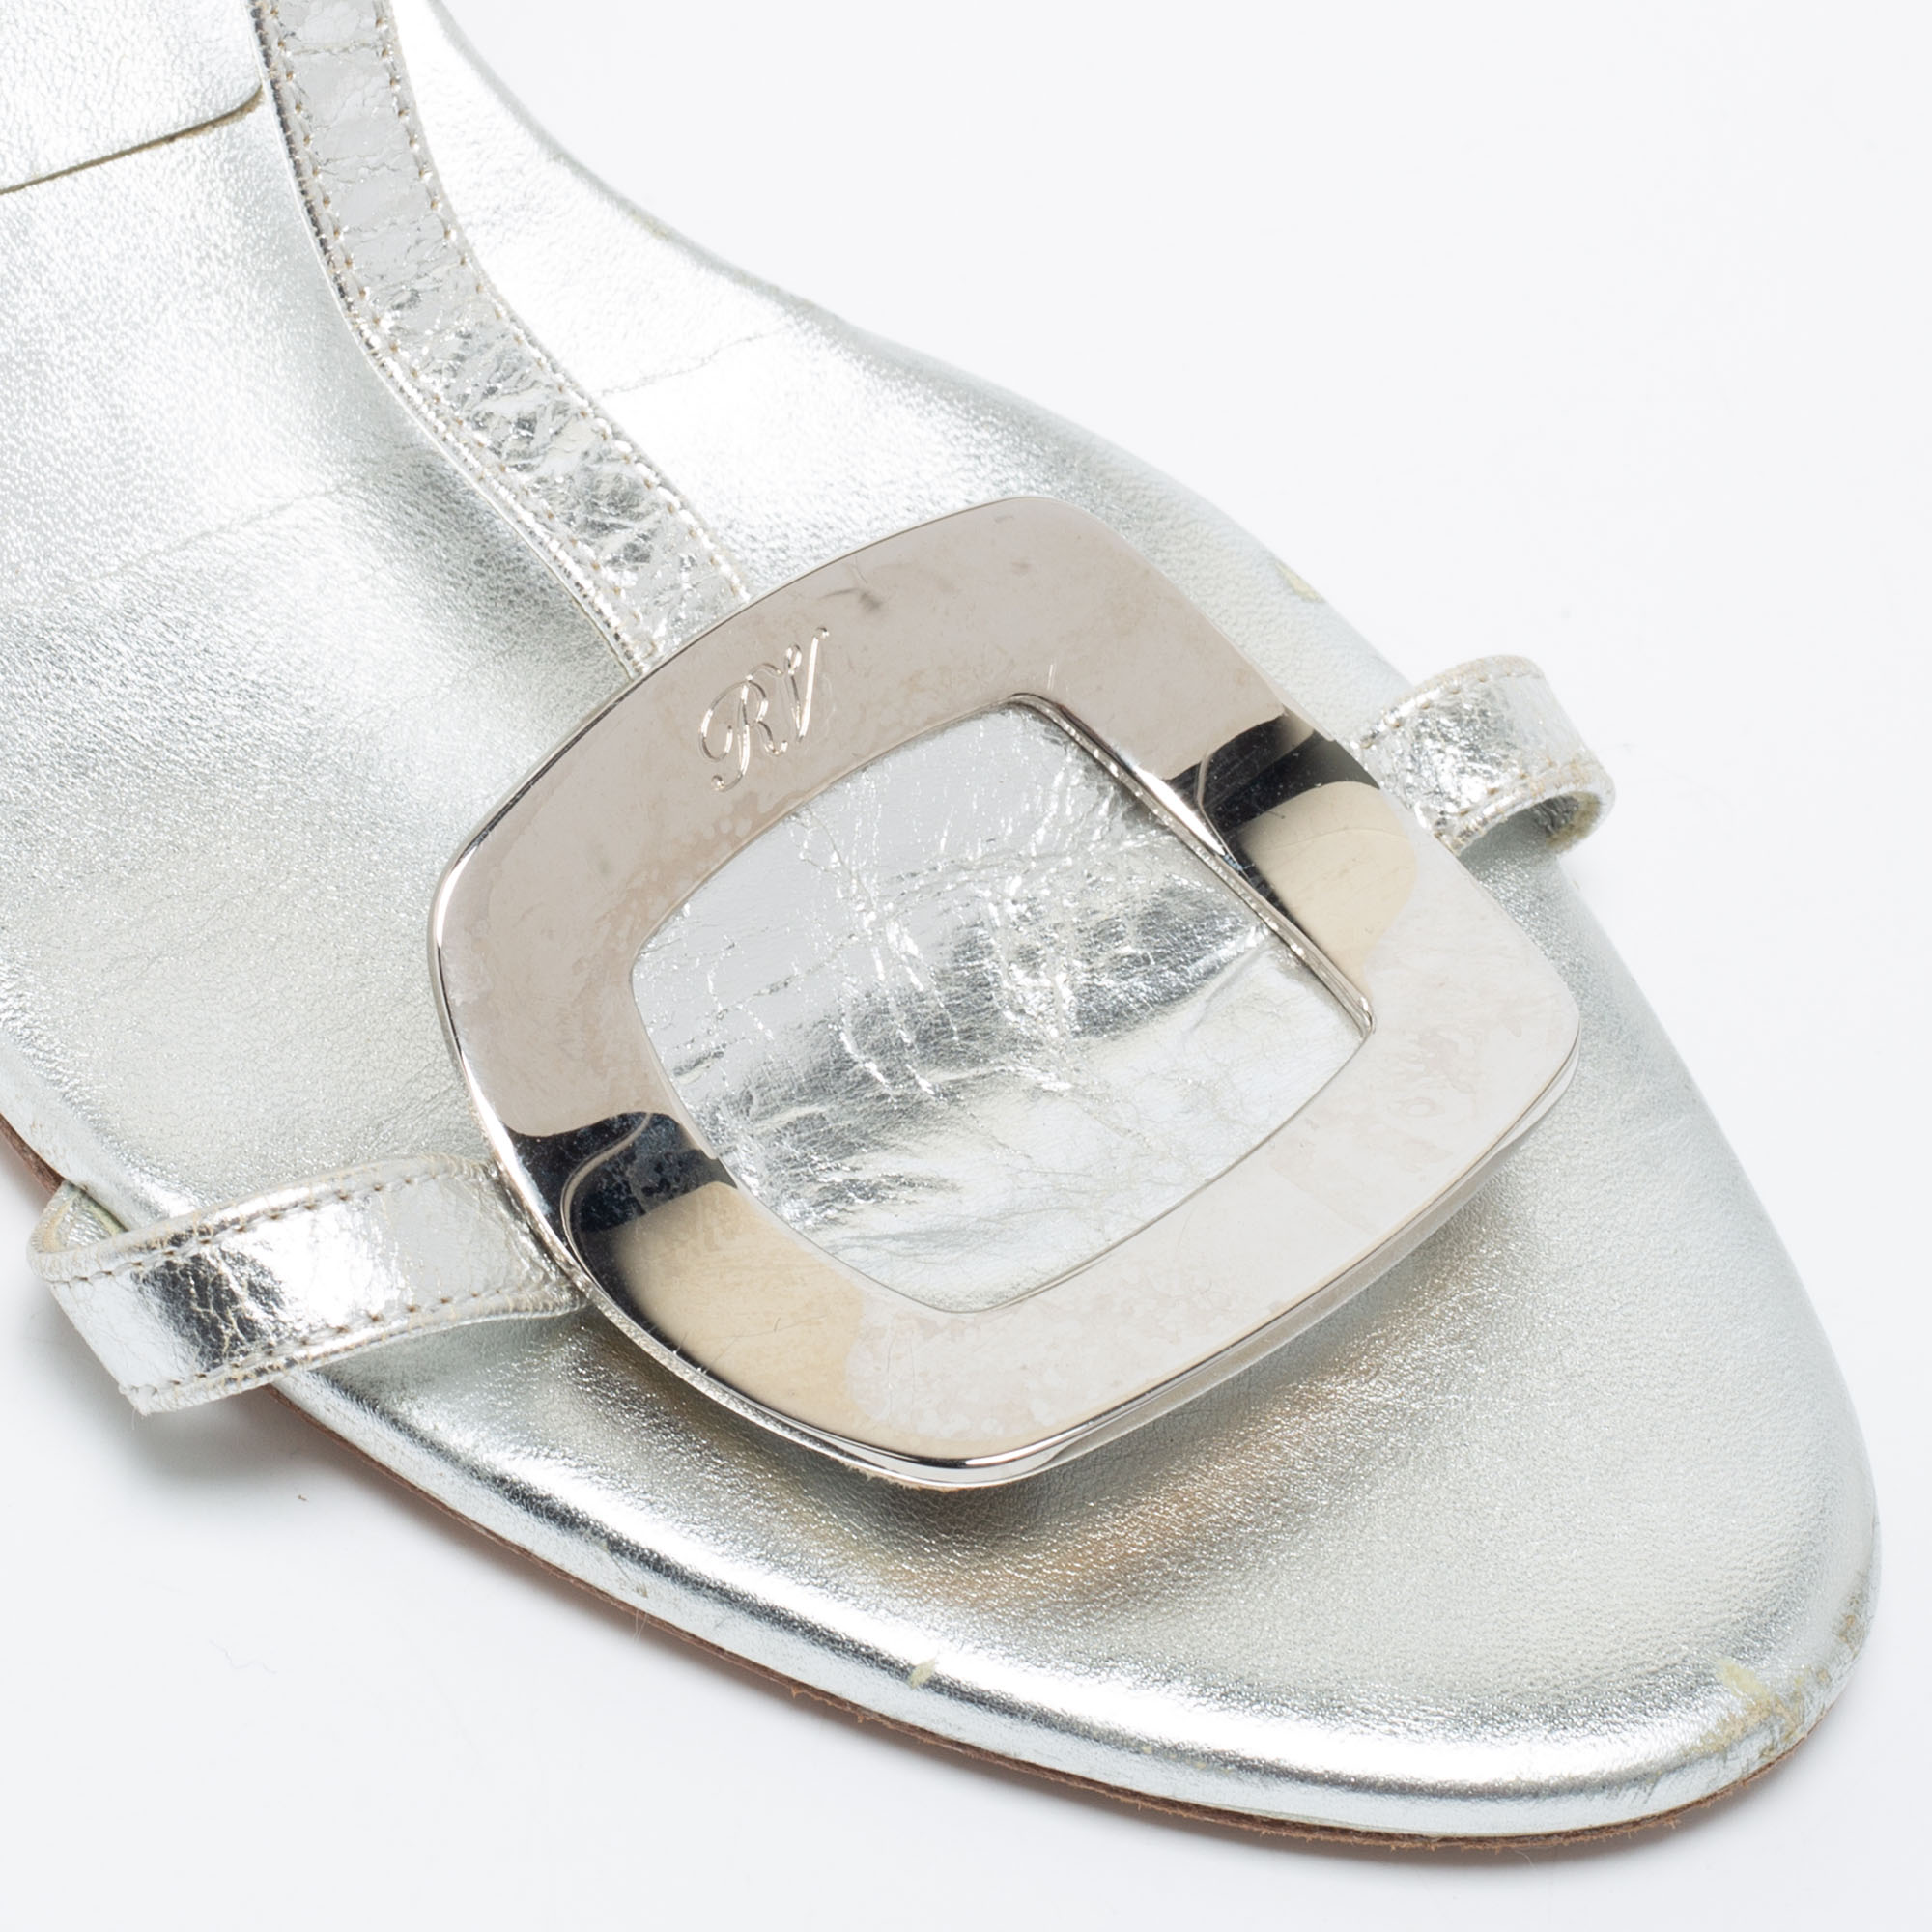 Roger Vivier Silver Metallic Silver Leather Ankle Strap Sandals Size 37